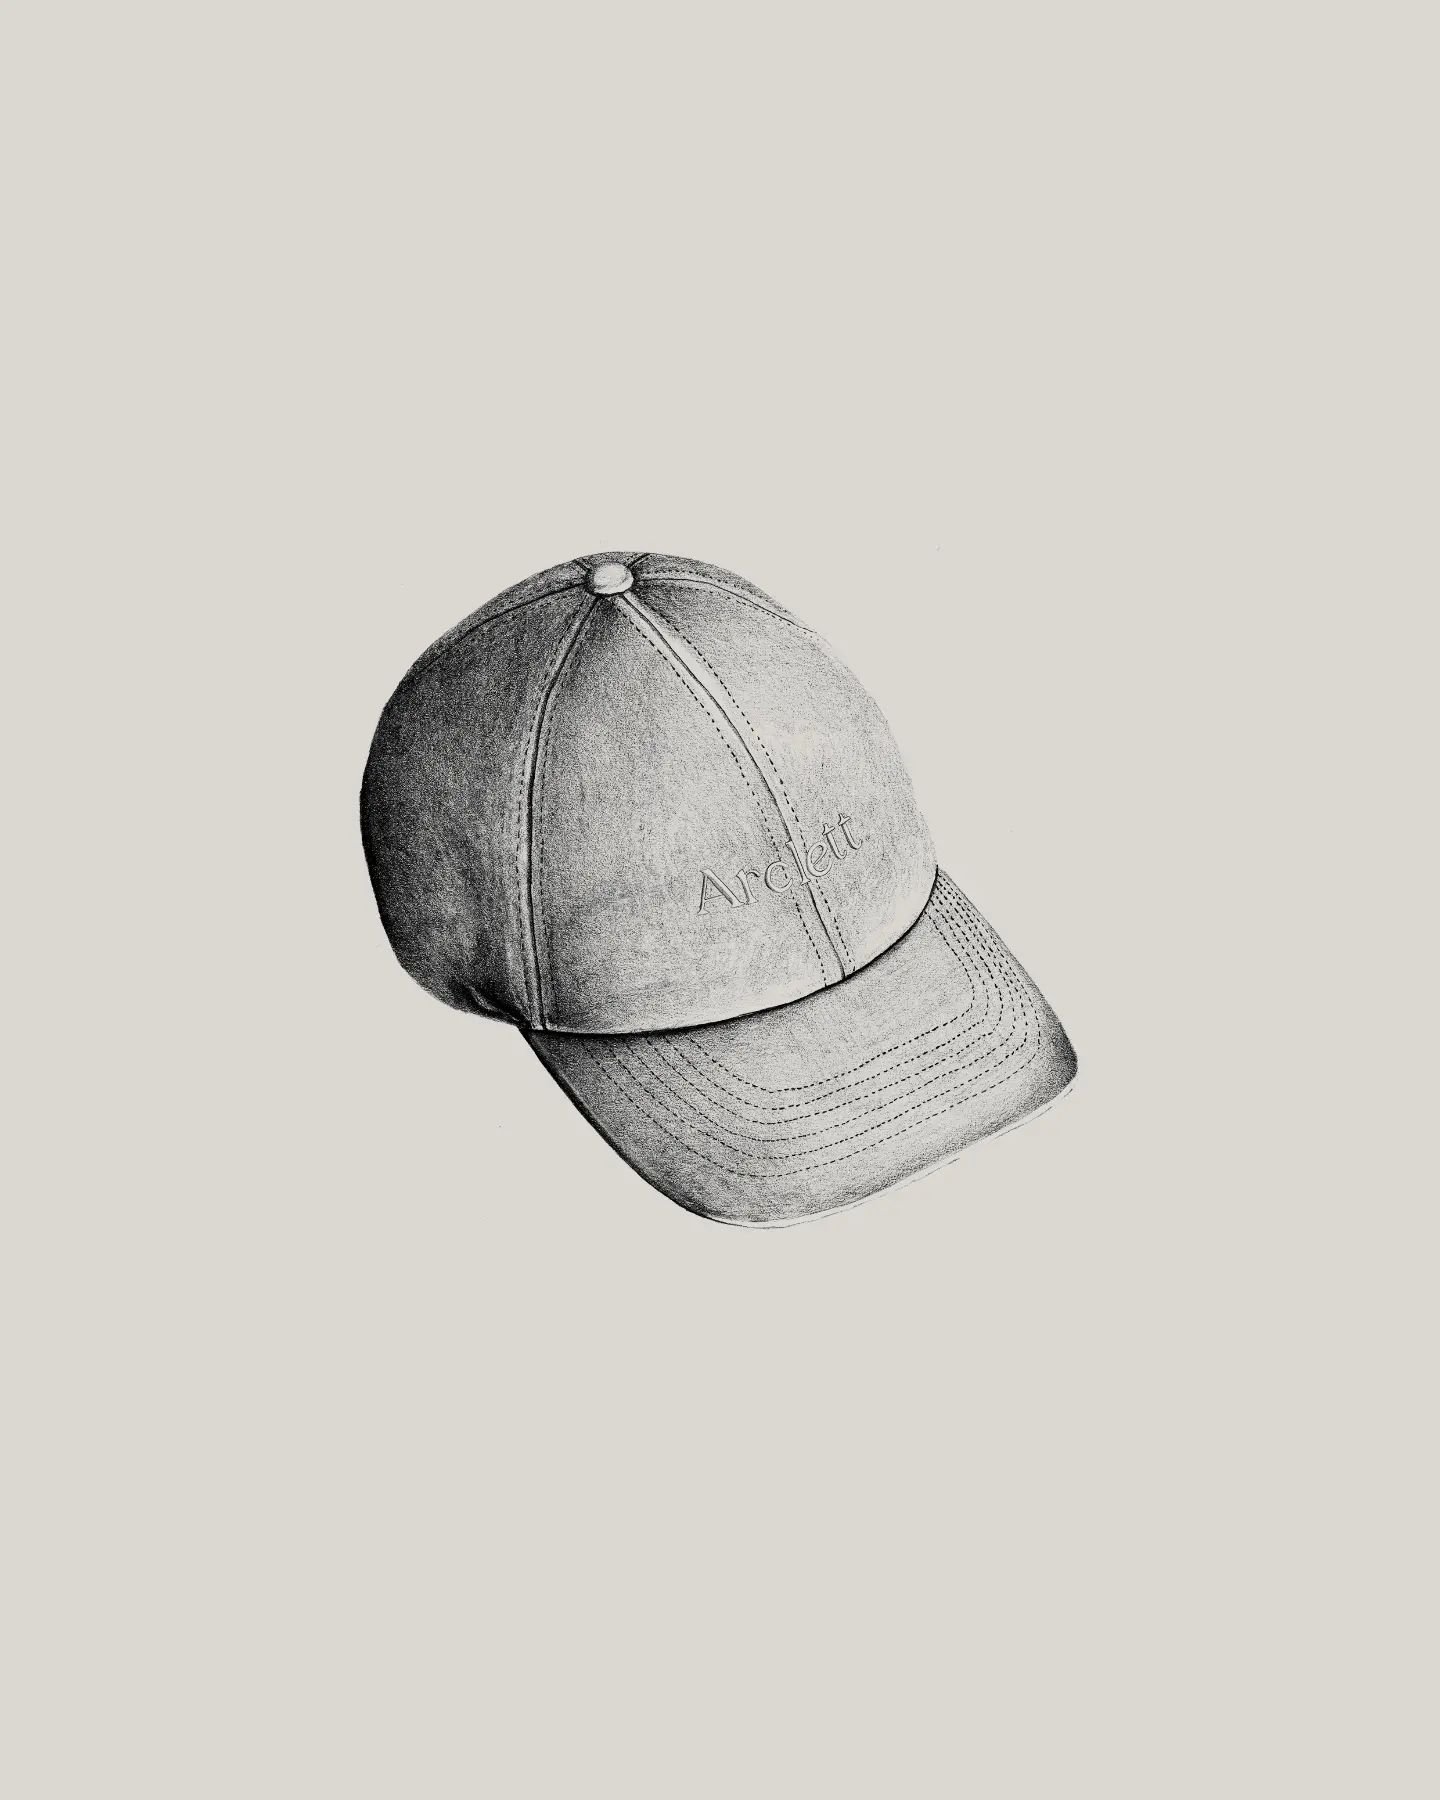 A pleasure as always to work with @arclett / Commissioned to illustrate the organic cap. Hand drawn pencil on paper &hearts;️✏️